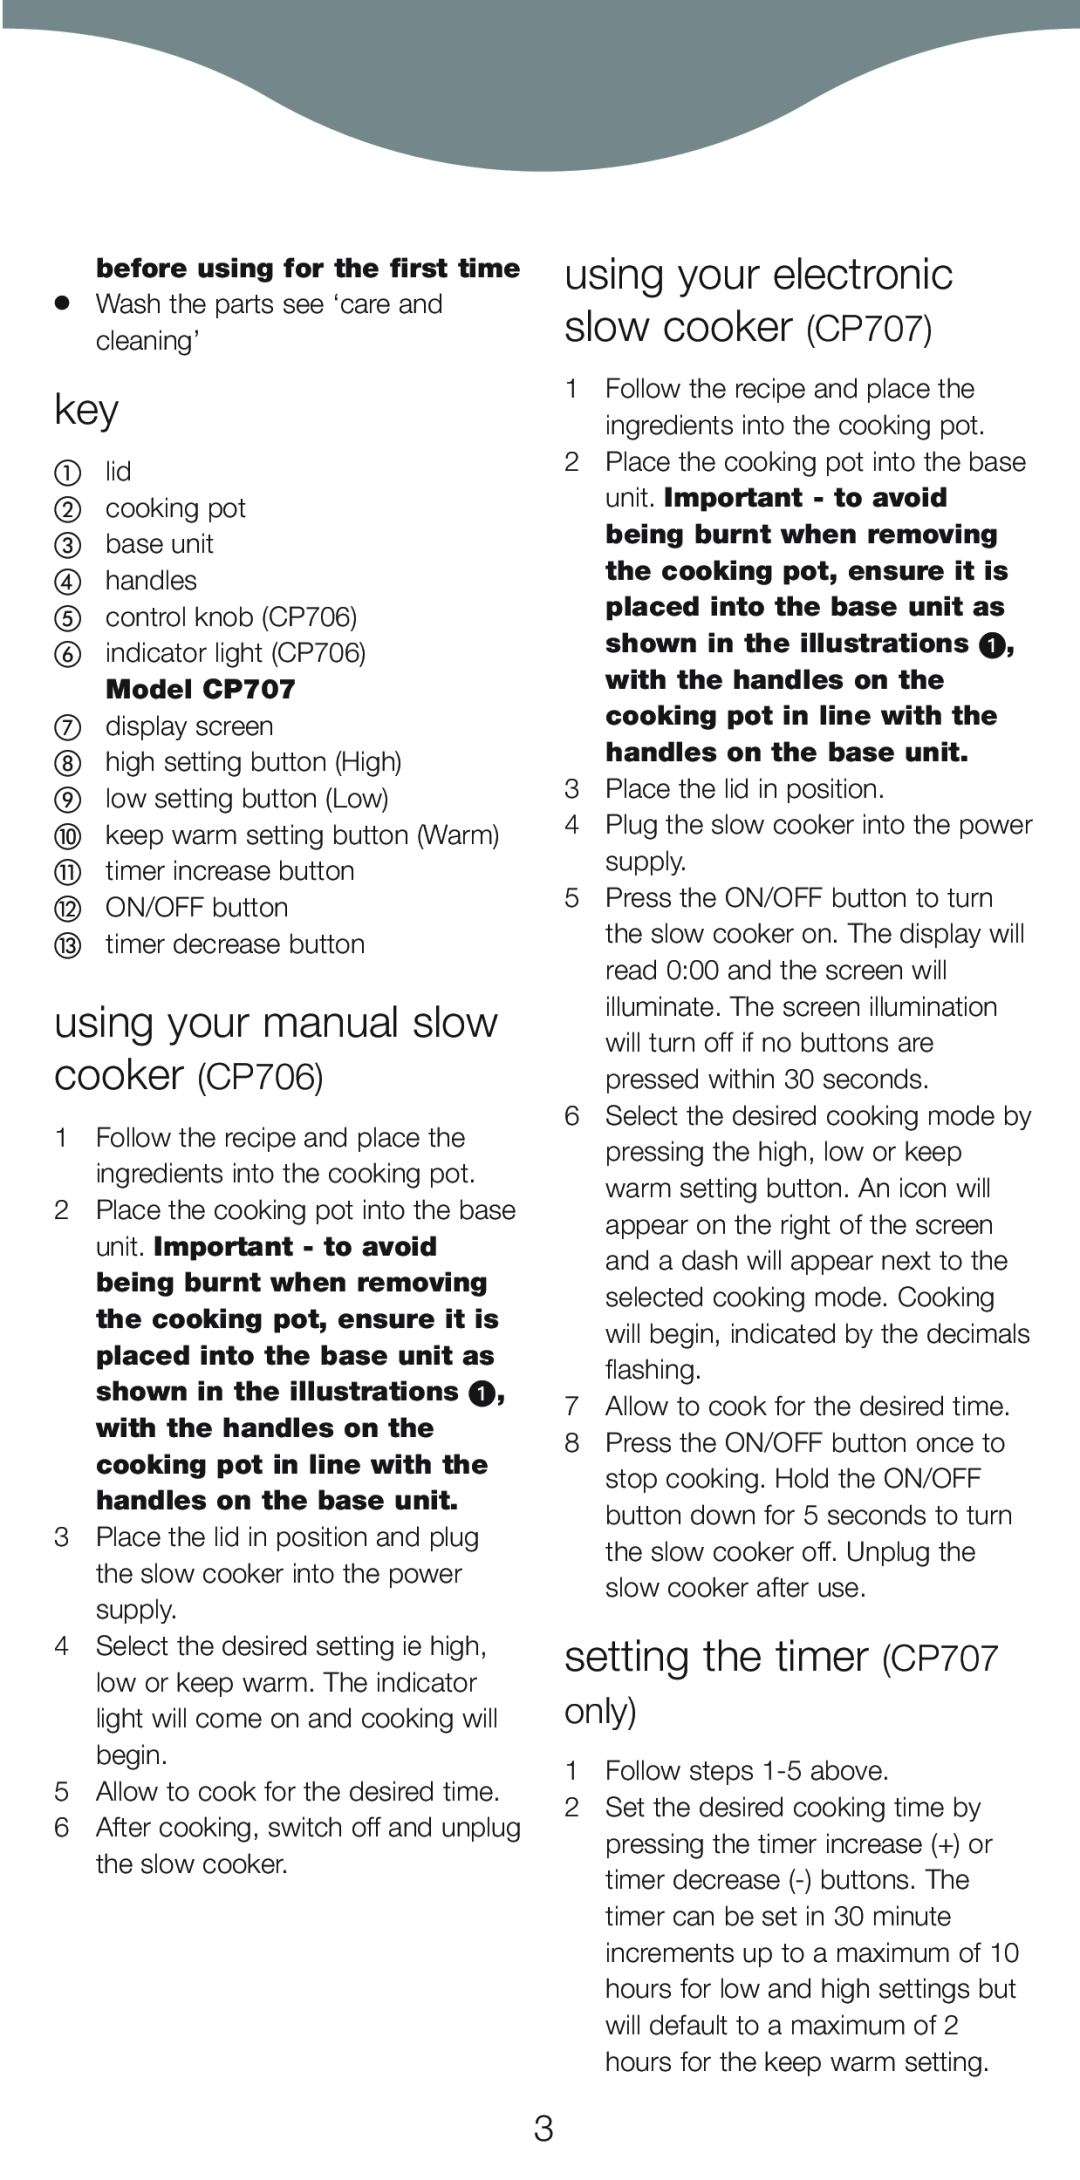 Kenwood using your manual slow cooker CP706, using your electronic slow cooker CP707, setting the timer CP707, only 